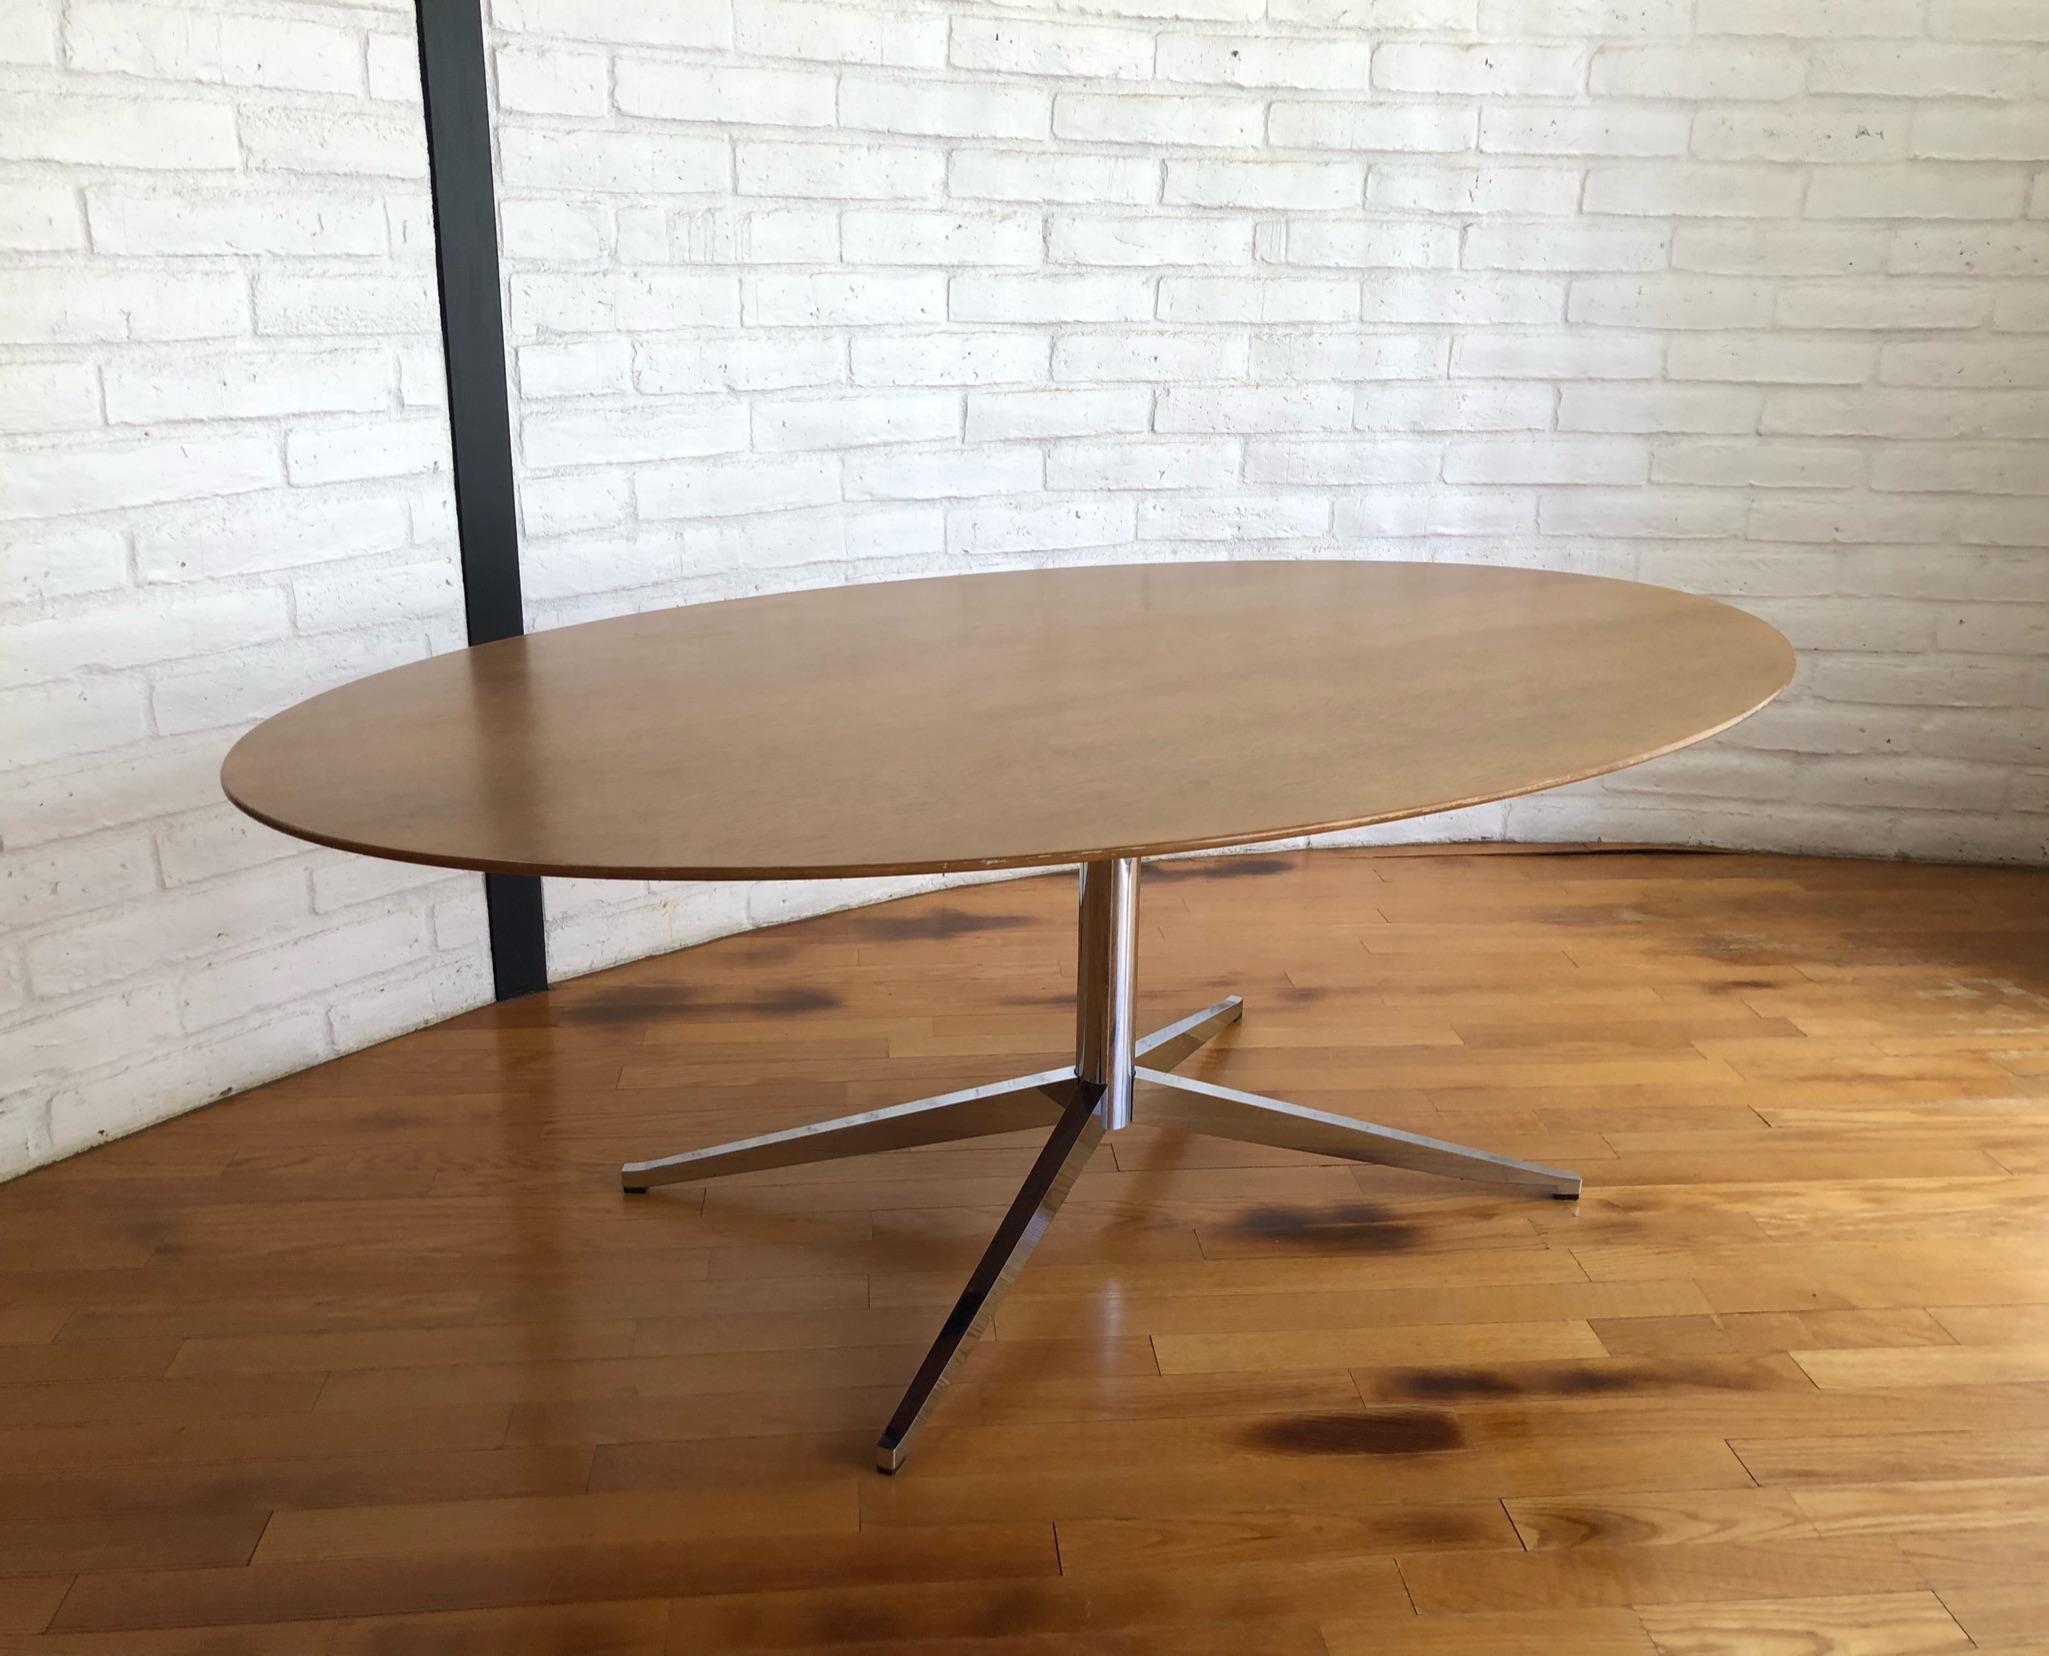 1960’s walnut oval dining table by Florence Knoll for Knoll.
In original condition with minor wear consistent with age. 
Retains knoll tag.